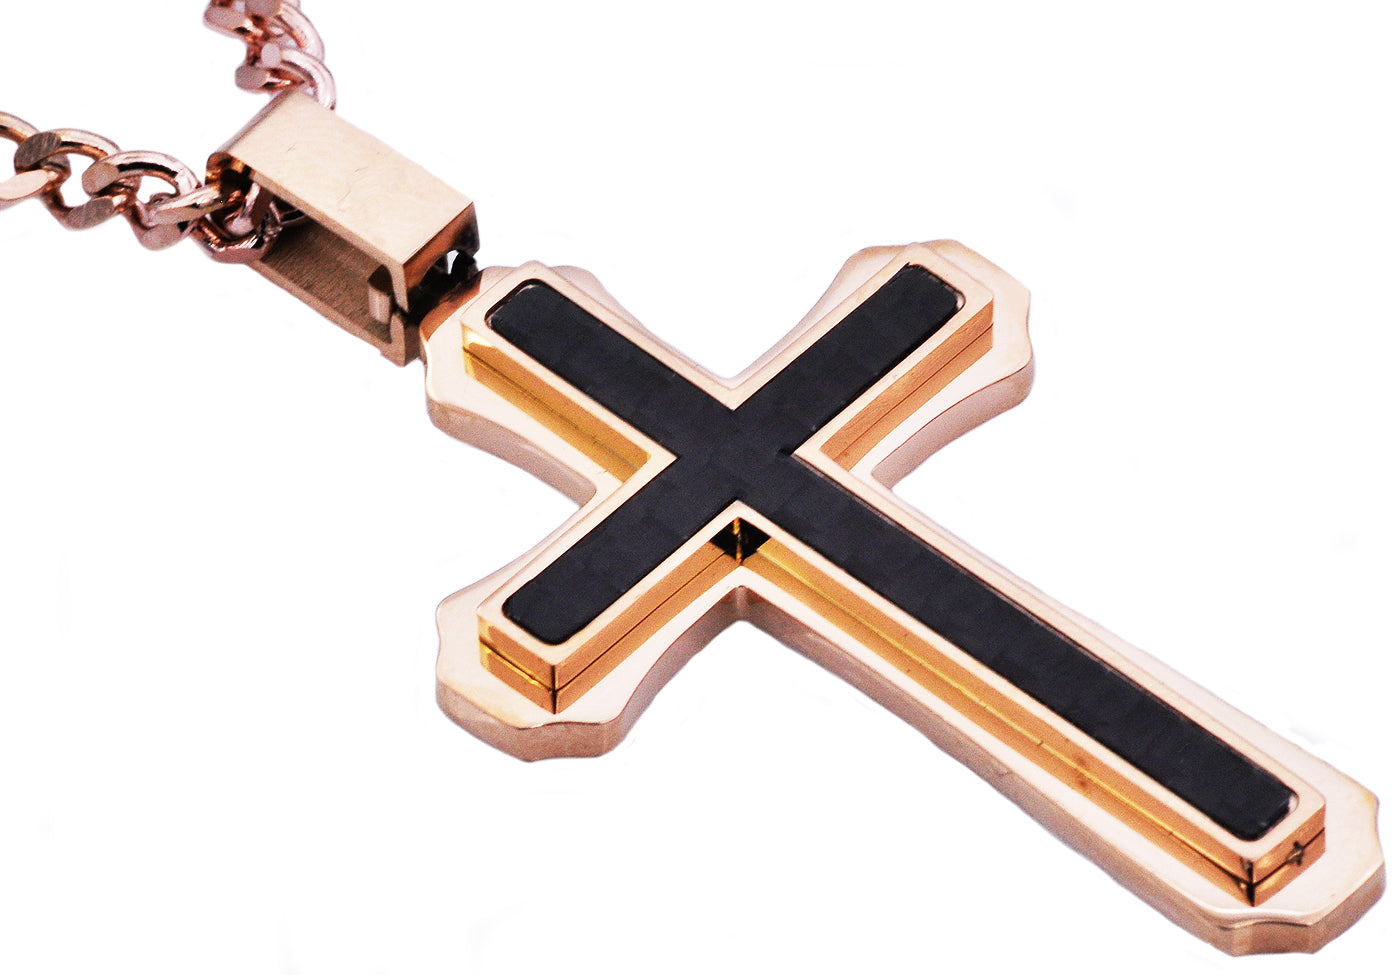 Golden Rose Cross Stainless Steel Chain Necklace from Glazd Jewels